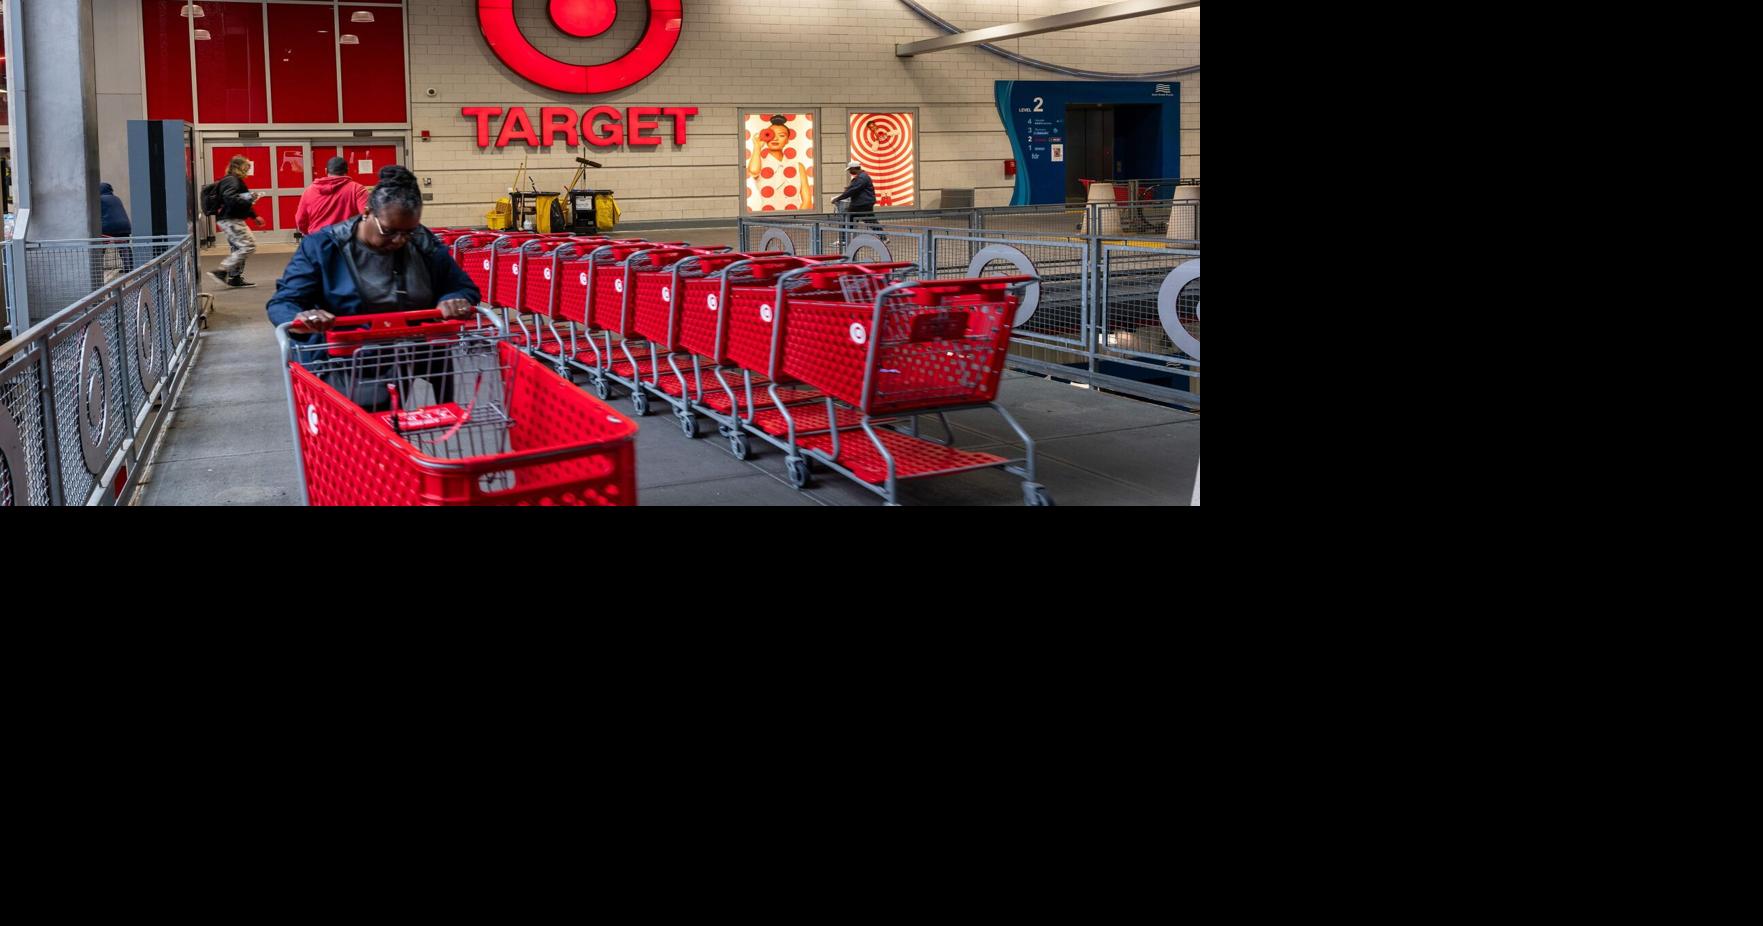 Target Lowers Prices on 5,000 Items to Attract Inflation-Wary Shoppers: Household Staples and Popular Brands Included